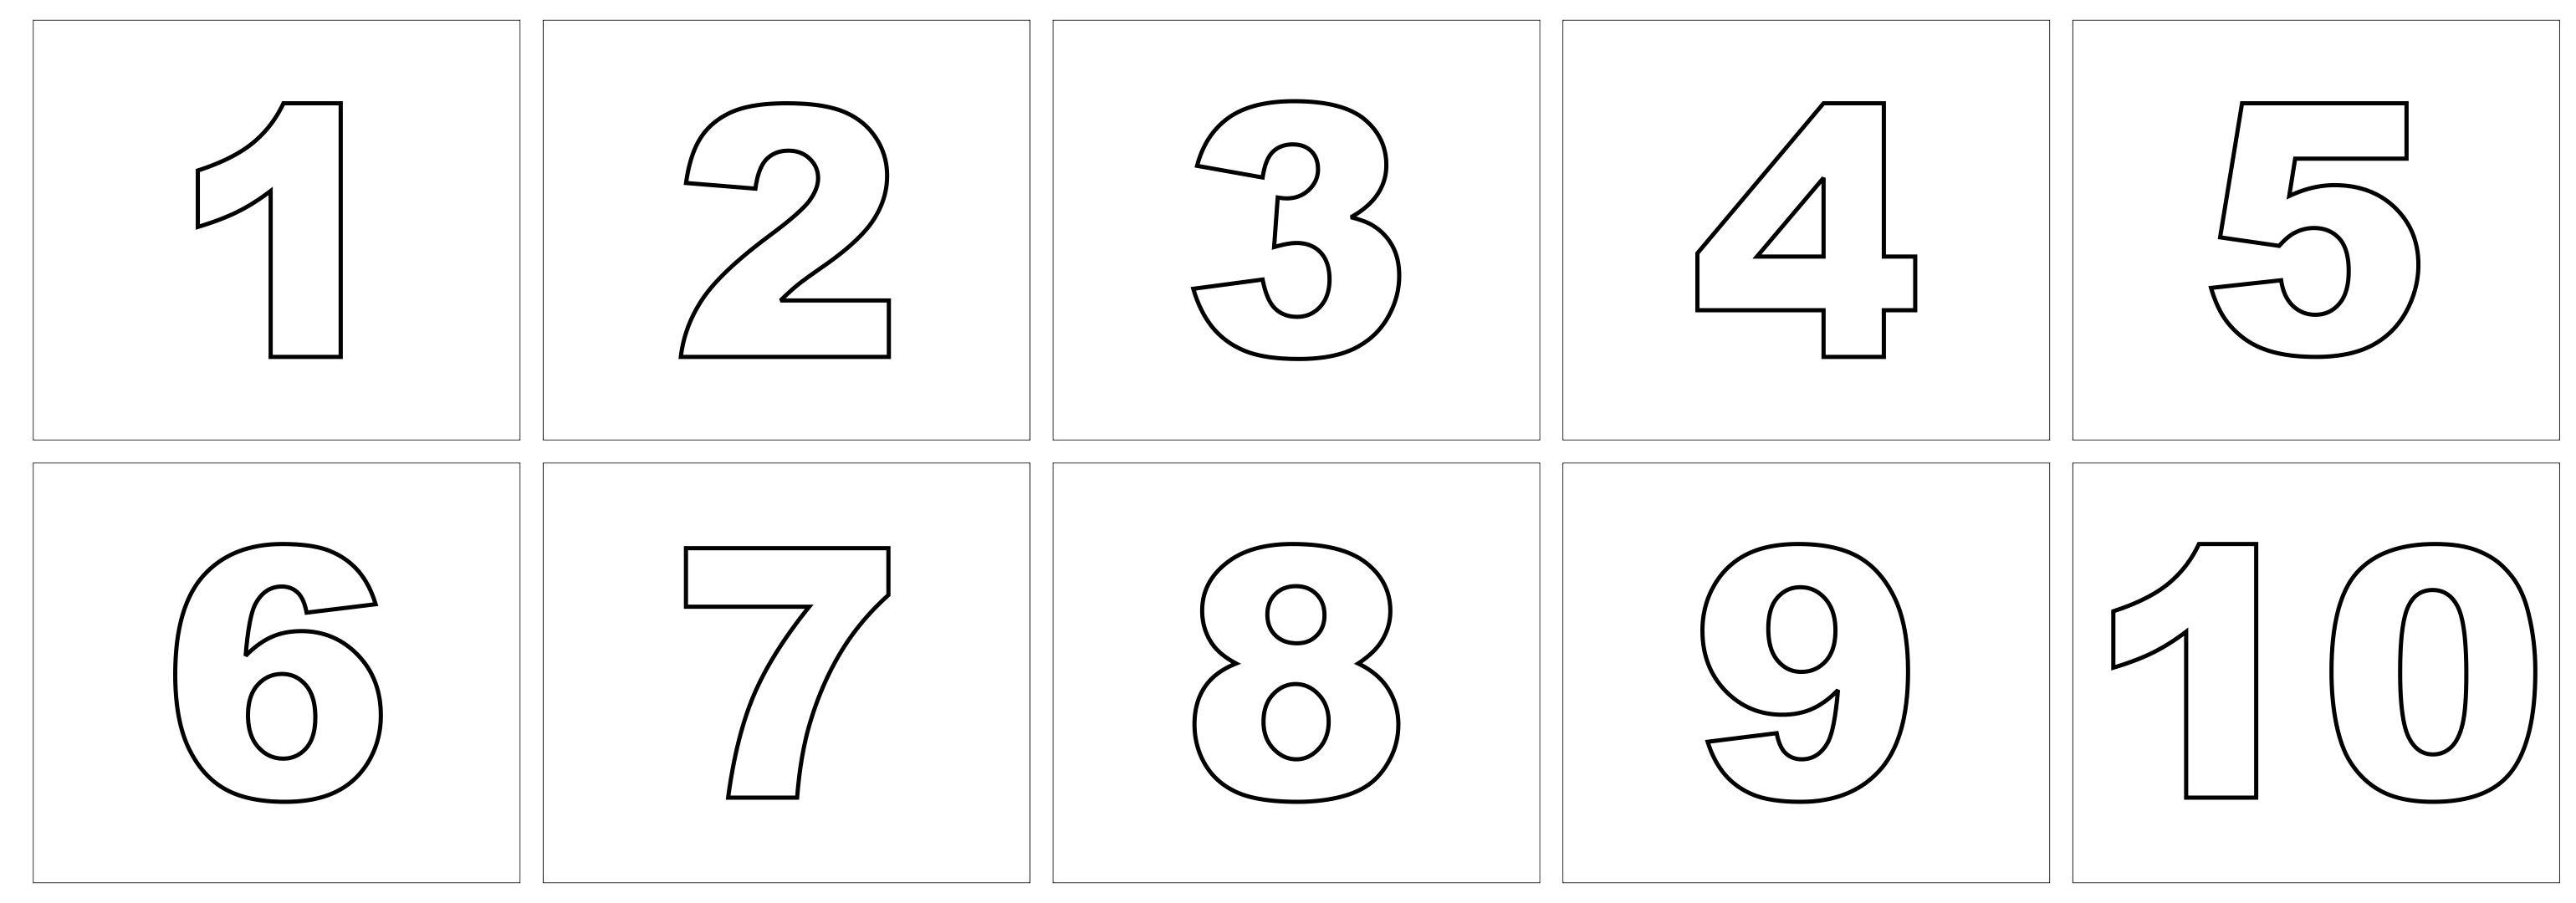 7-best-images-of-large-printable-numbers-1-9-printable-numbers-1-9-large-printable-numbers-1